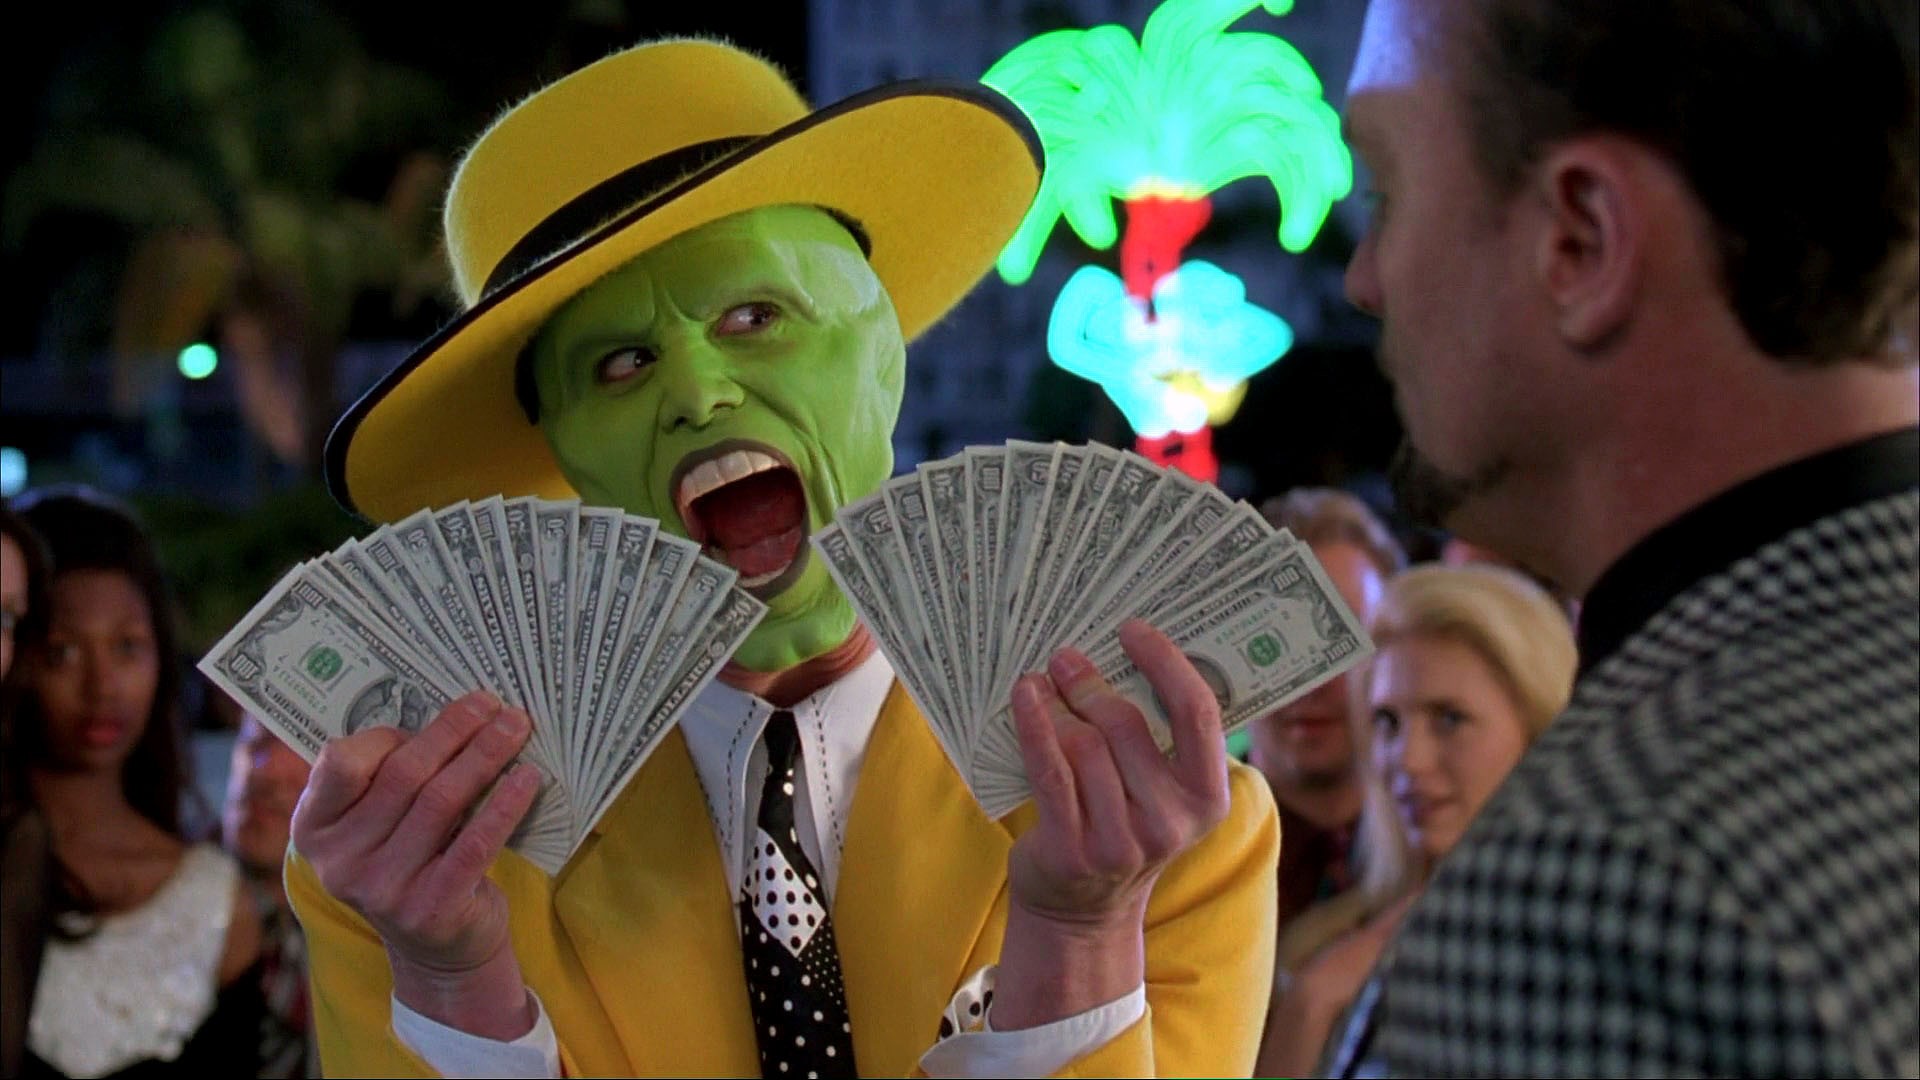 People 1920x1080 The Mask money film stills Jim Carrey mask suits green humor movies